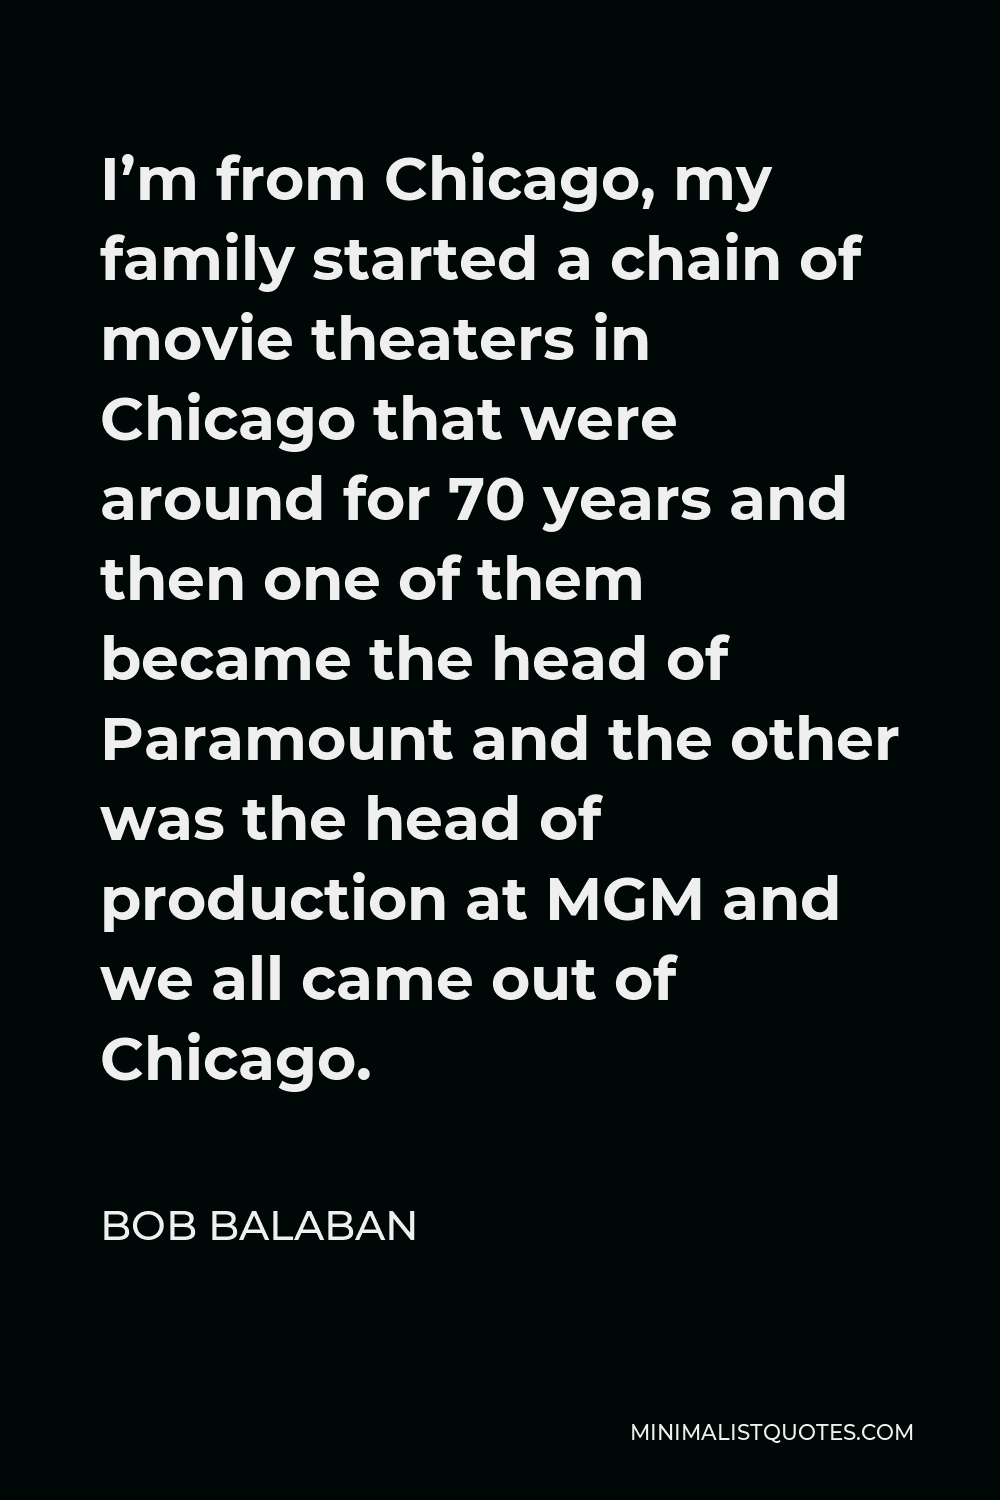 Bob Balaban Quote - I’m from Chicago, my family started a chain of movie theaters in Chicago that were around for 70 years and then one of them became the head of Paramount and the other was the head of production at MGM and we all came out of Chicago.